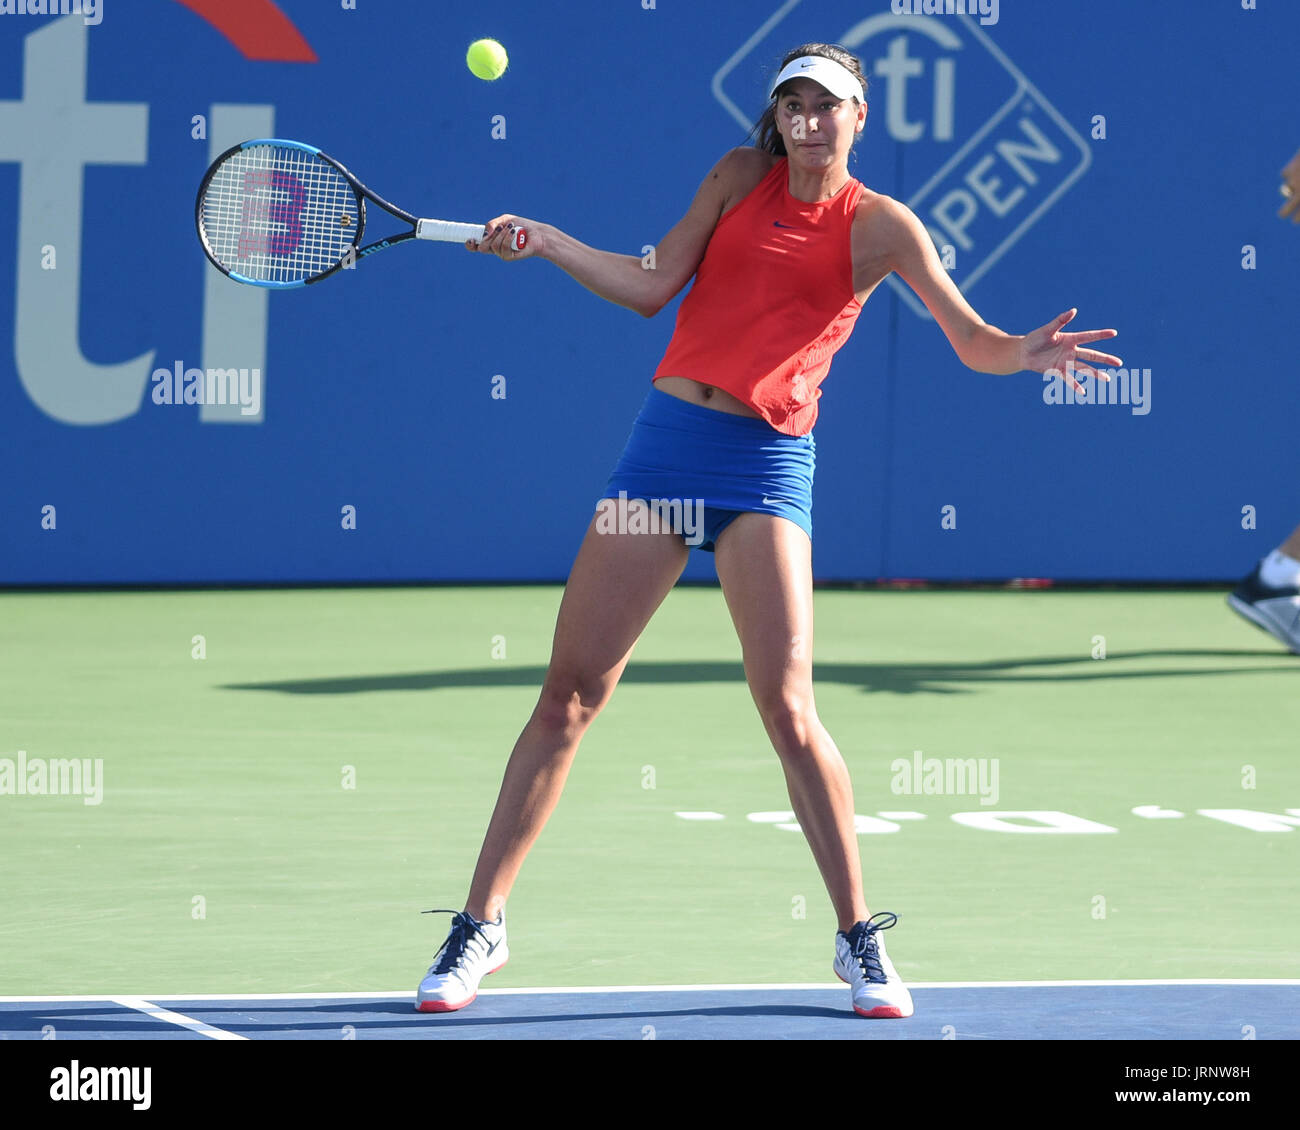 Washington, D.C, USA. 5th Aug, 2017. OCEANE DODIN hits a forehand during her semifinal match at the Citi Open at the Rock Creek Park Tennis Center in Washington, DC Credit: Kyle Gustafson/ZUMA Wire/Alamy Live News Stock Photo